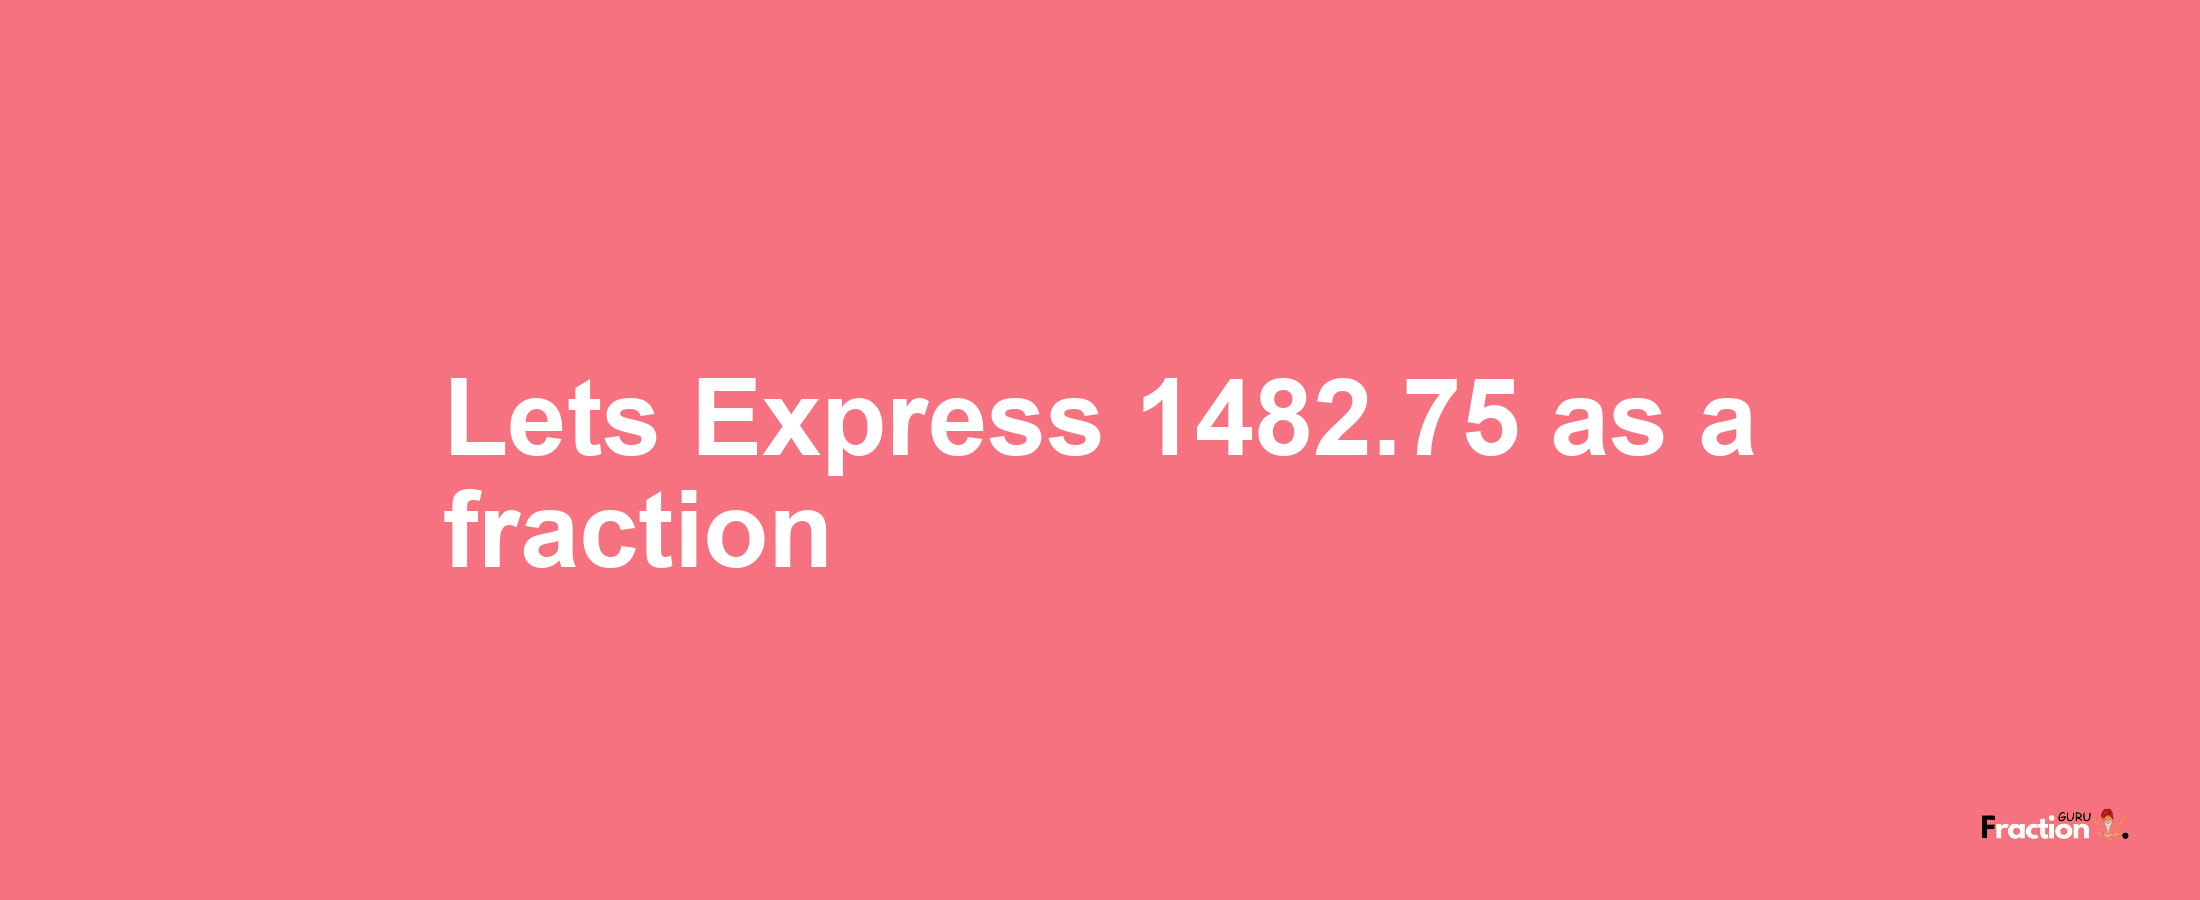 Lets Express 1482.75 as afraction